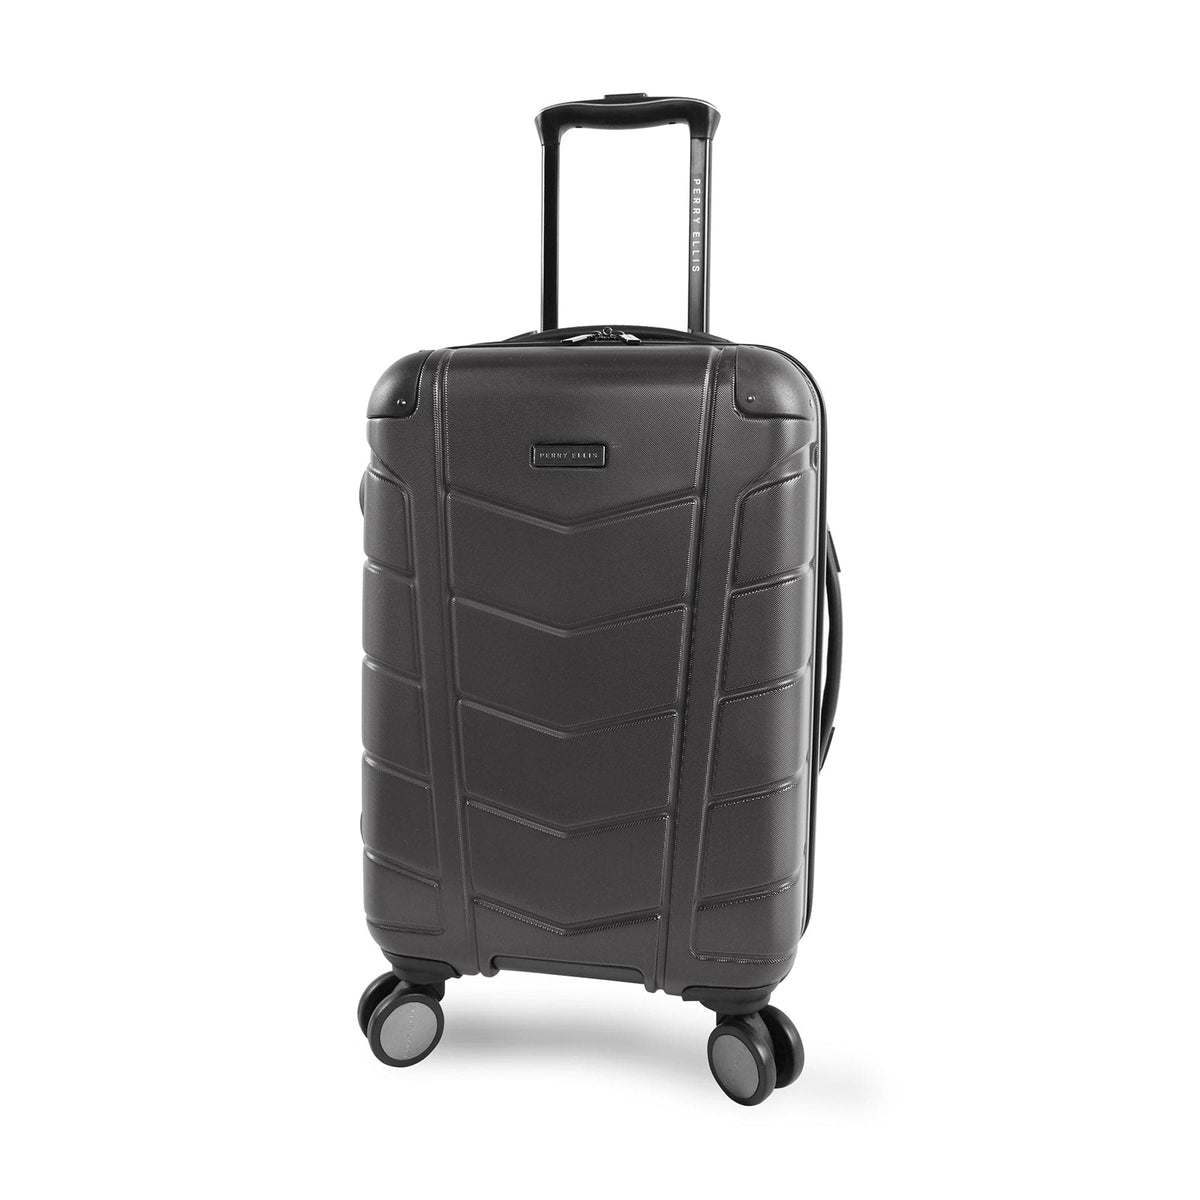 Perry Ellis Tanner 21" Hardside Carry-On Spinner Luggage